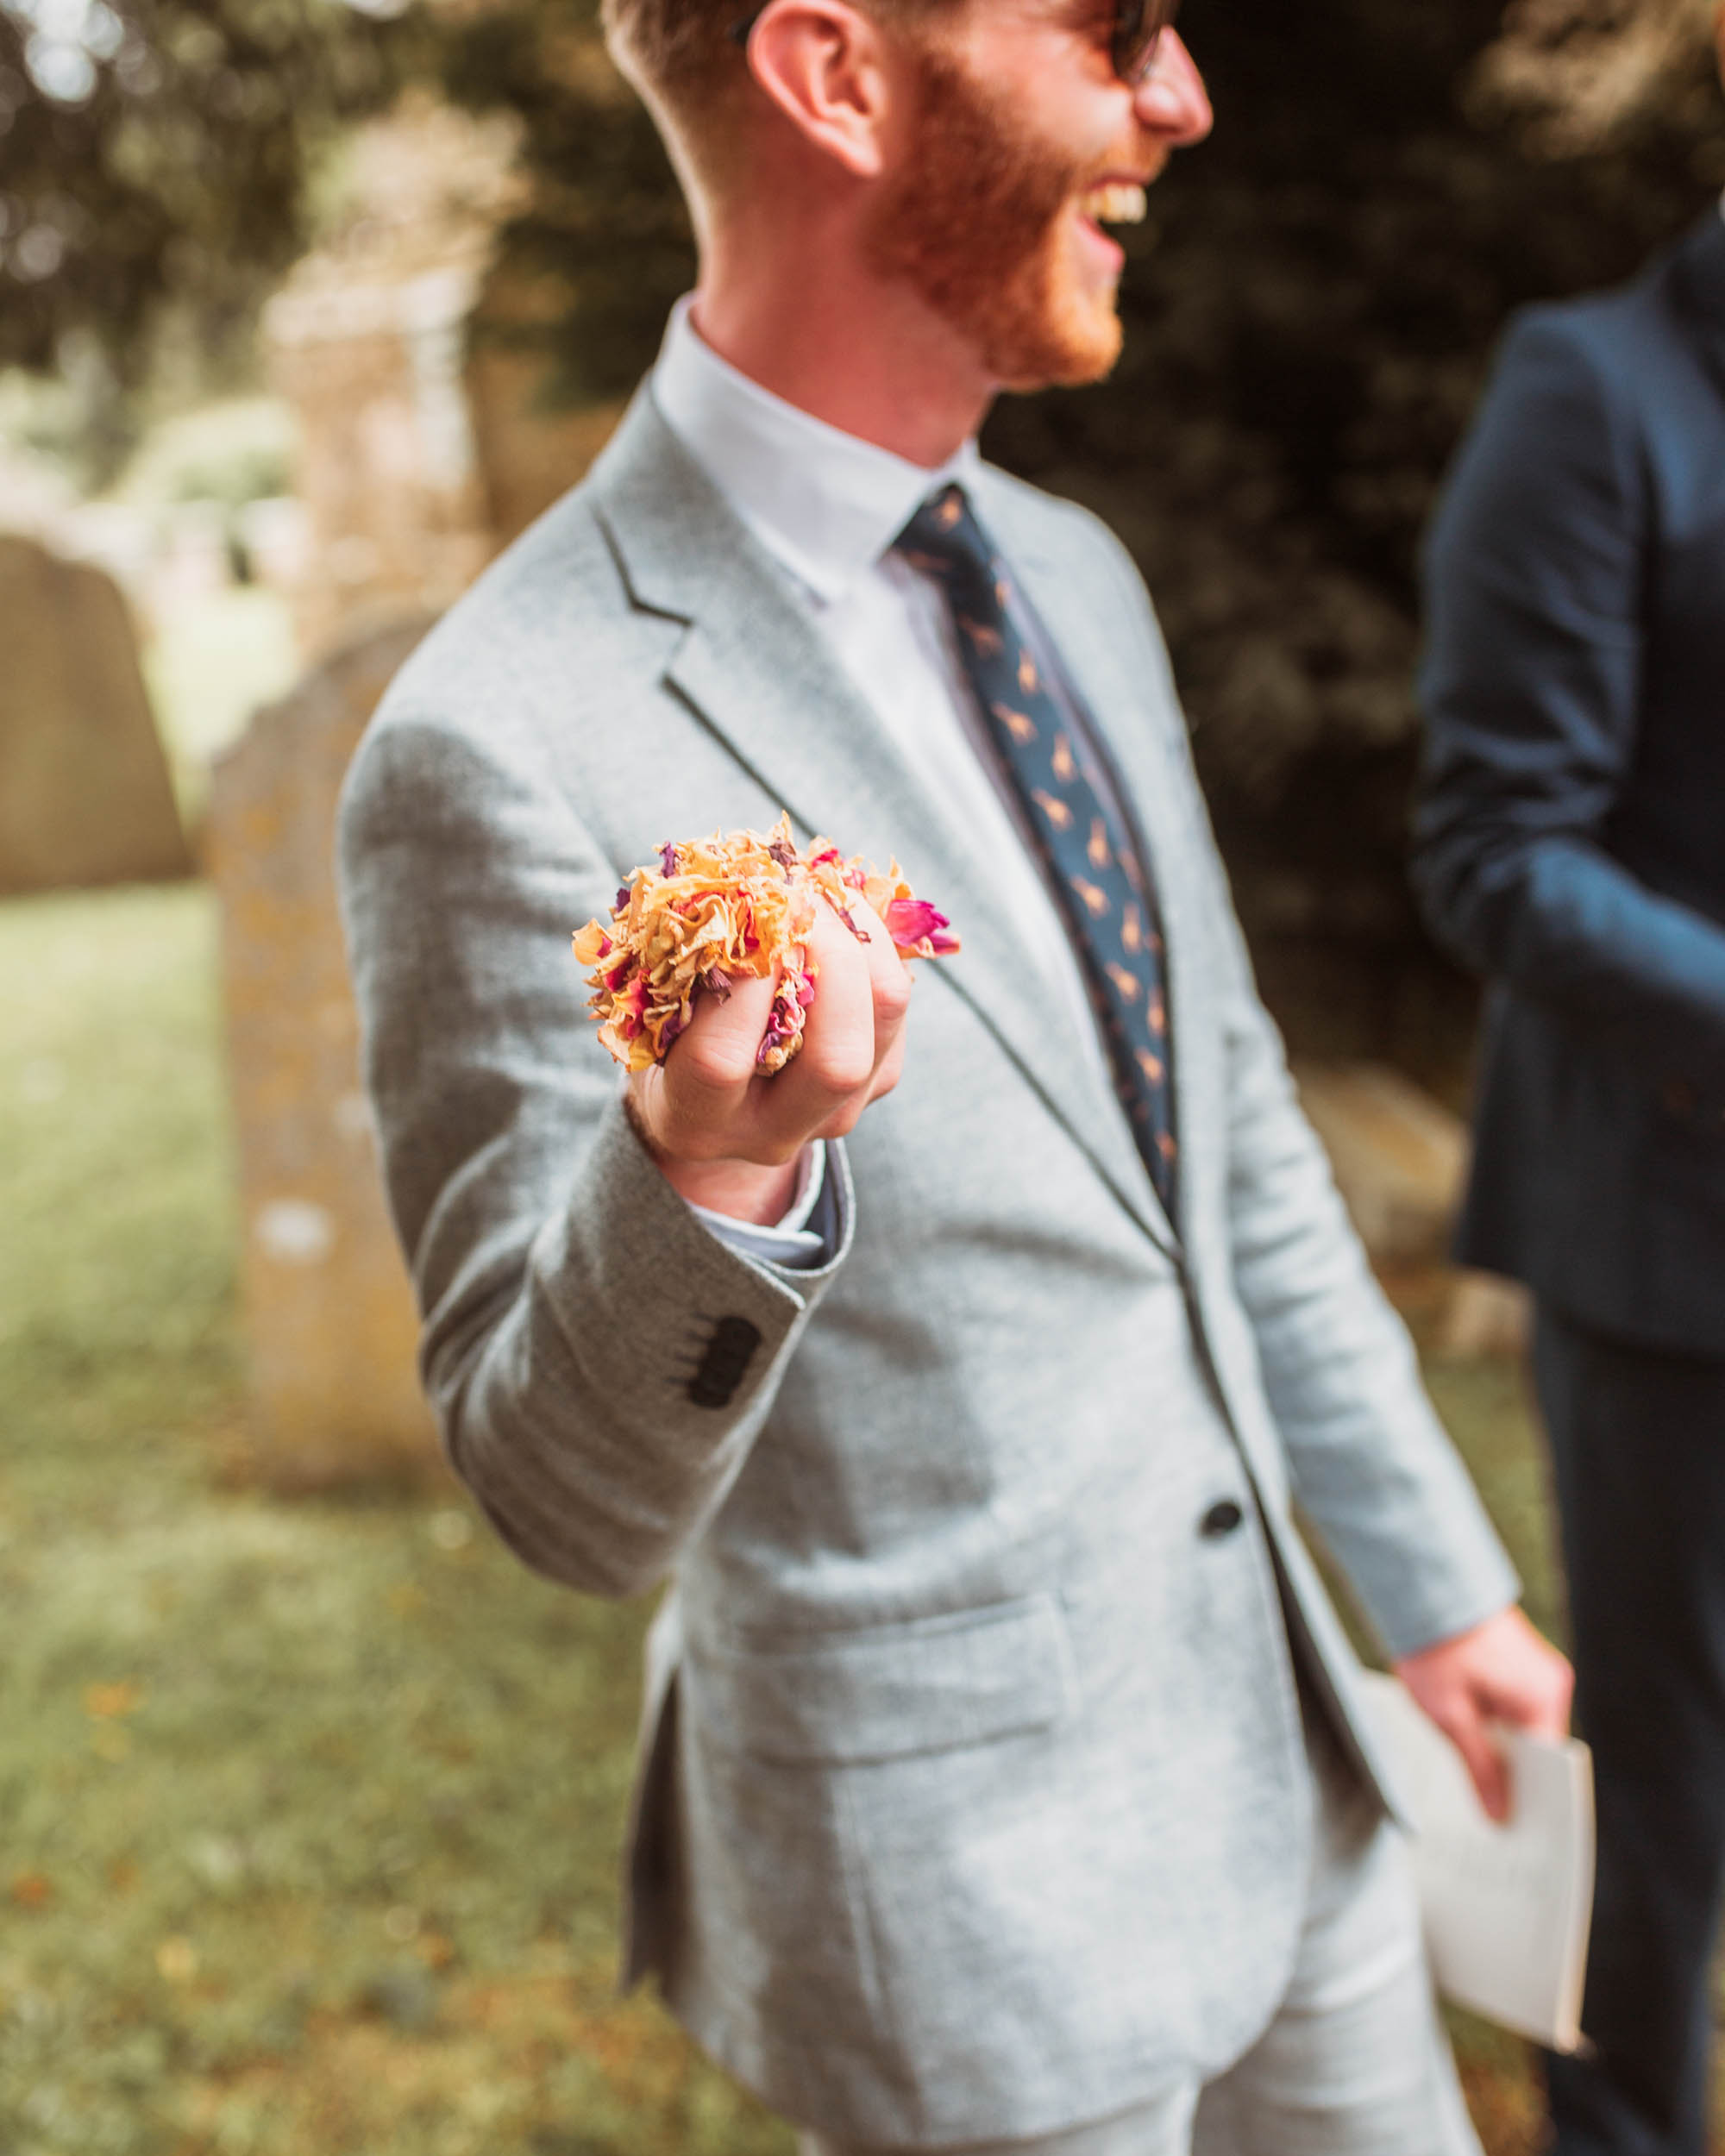 sustainable wedding suit ideas - do you really need to buy new? Accessorise and support local sellers instead